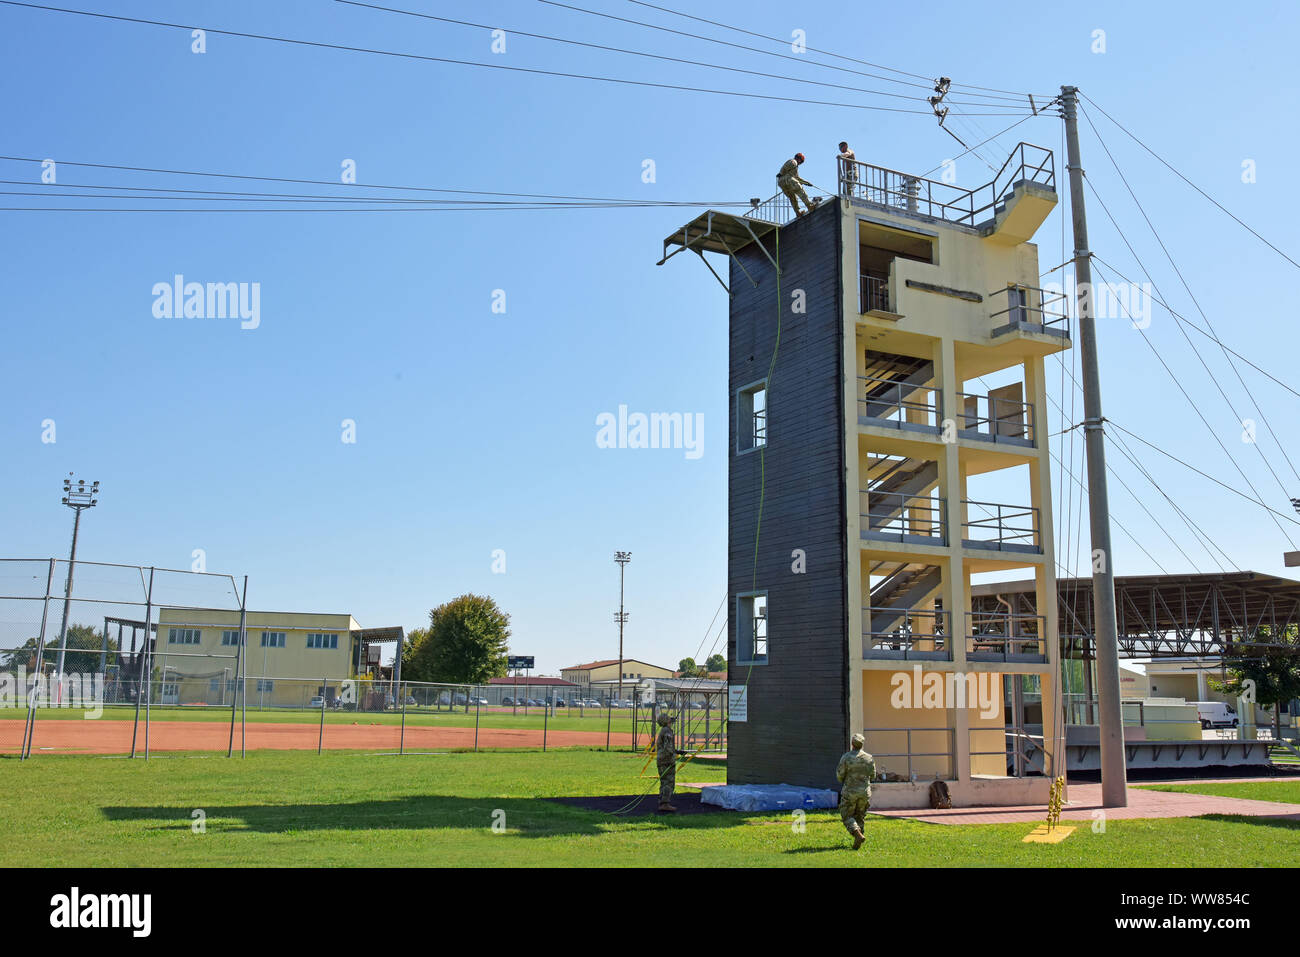 Soldiers from U.S. Army Africa conduct rappel training on the 7th Army Training Command-constructed jump tower, the only Army jump tower in Europe, at Caserma Ederle in Vicenza, Italy, Sept. 12, 2019. Soldiers rappel from the 34-foot-tall tower wearing a safety harness, helmet and gloves to gain confidence. (U.S. Army photo by Paolo Bovo) Stock Photo